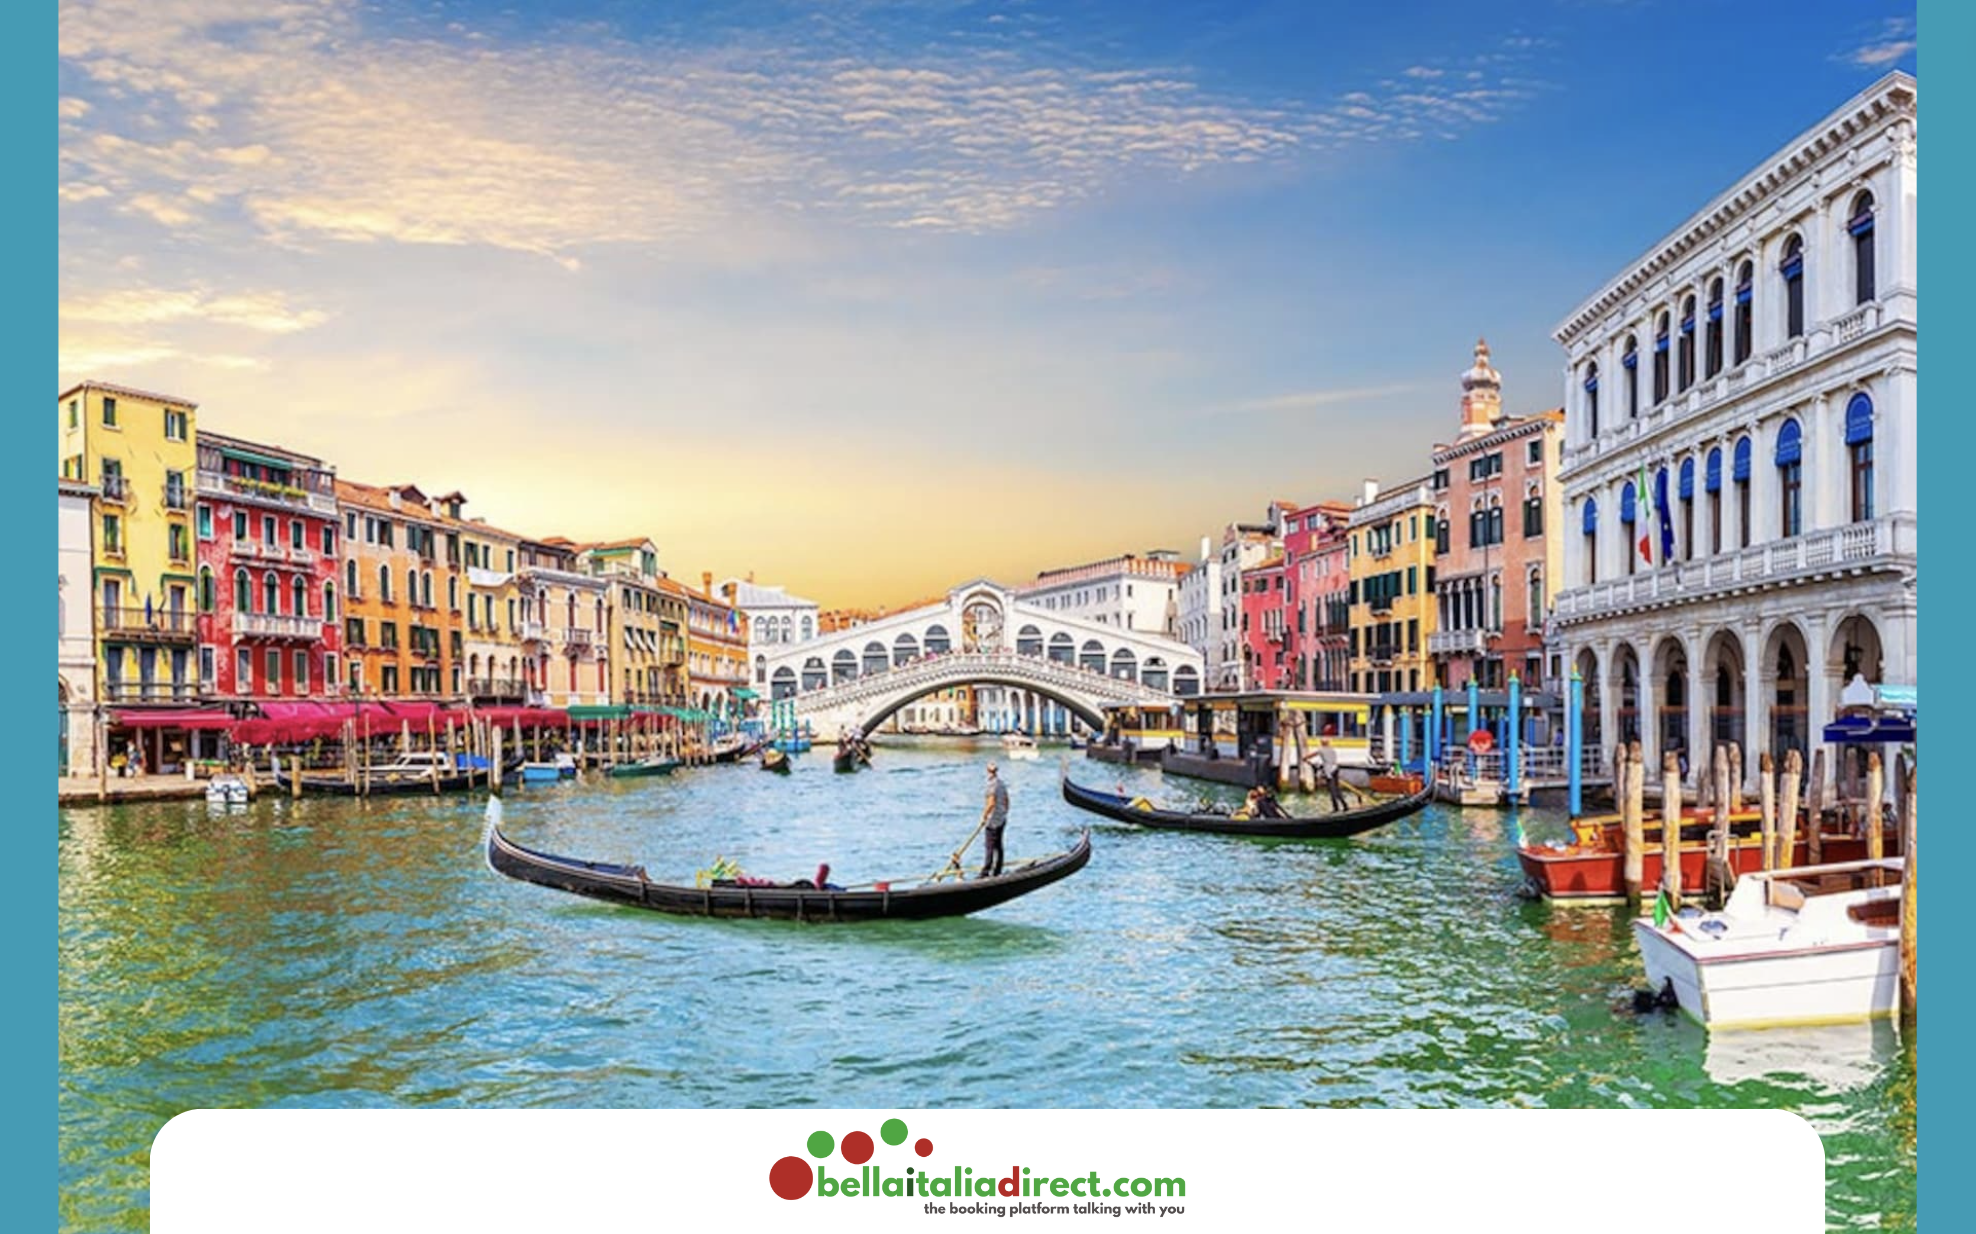 VENICE AND THE CINQUE TERRE: A TOUR TO FALL IN LOVE WITH BEAUTIFUL ITALY